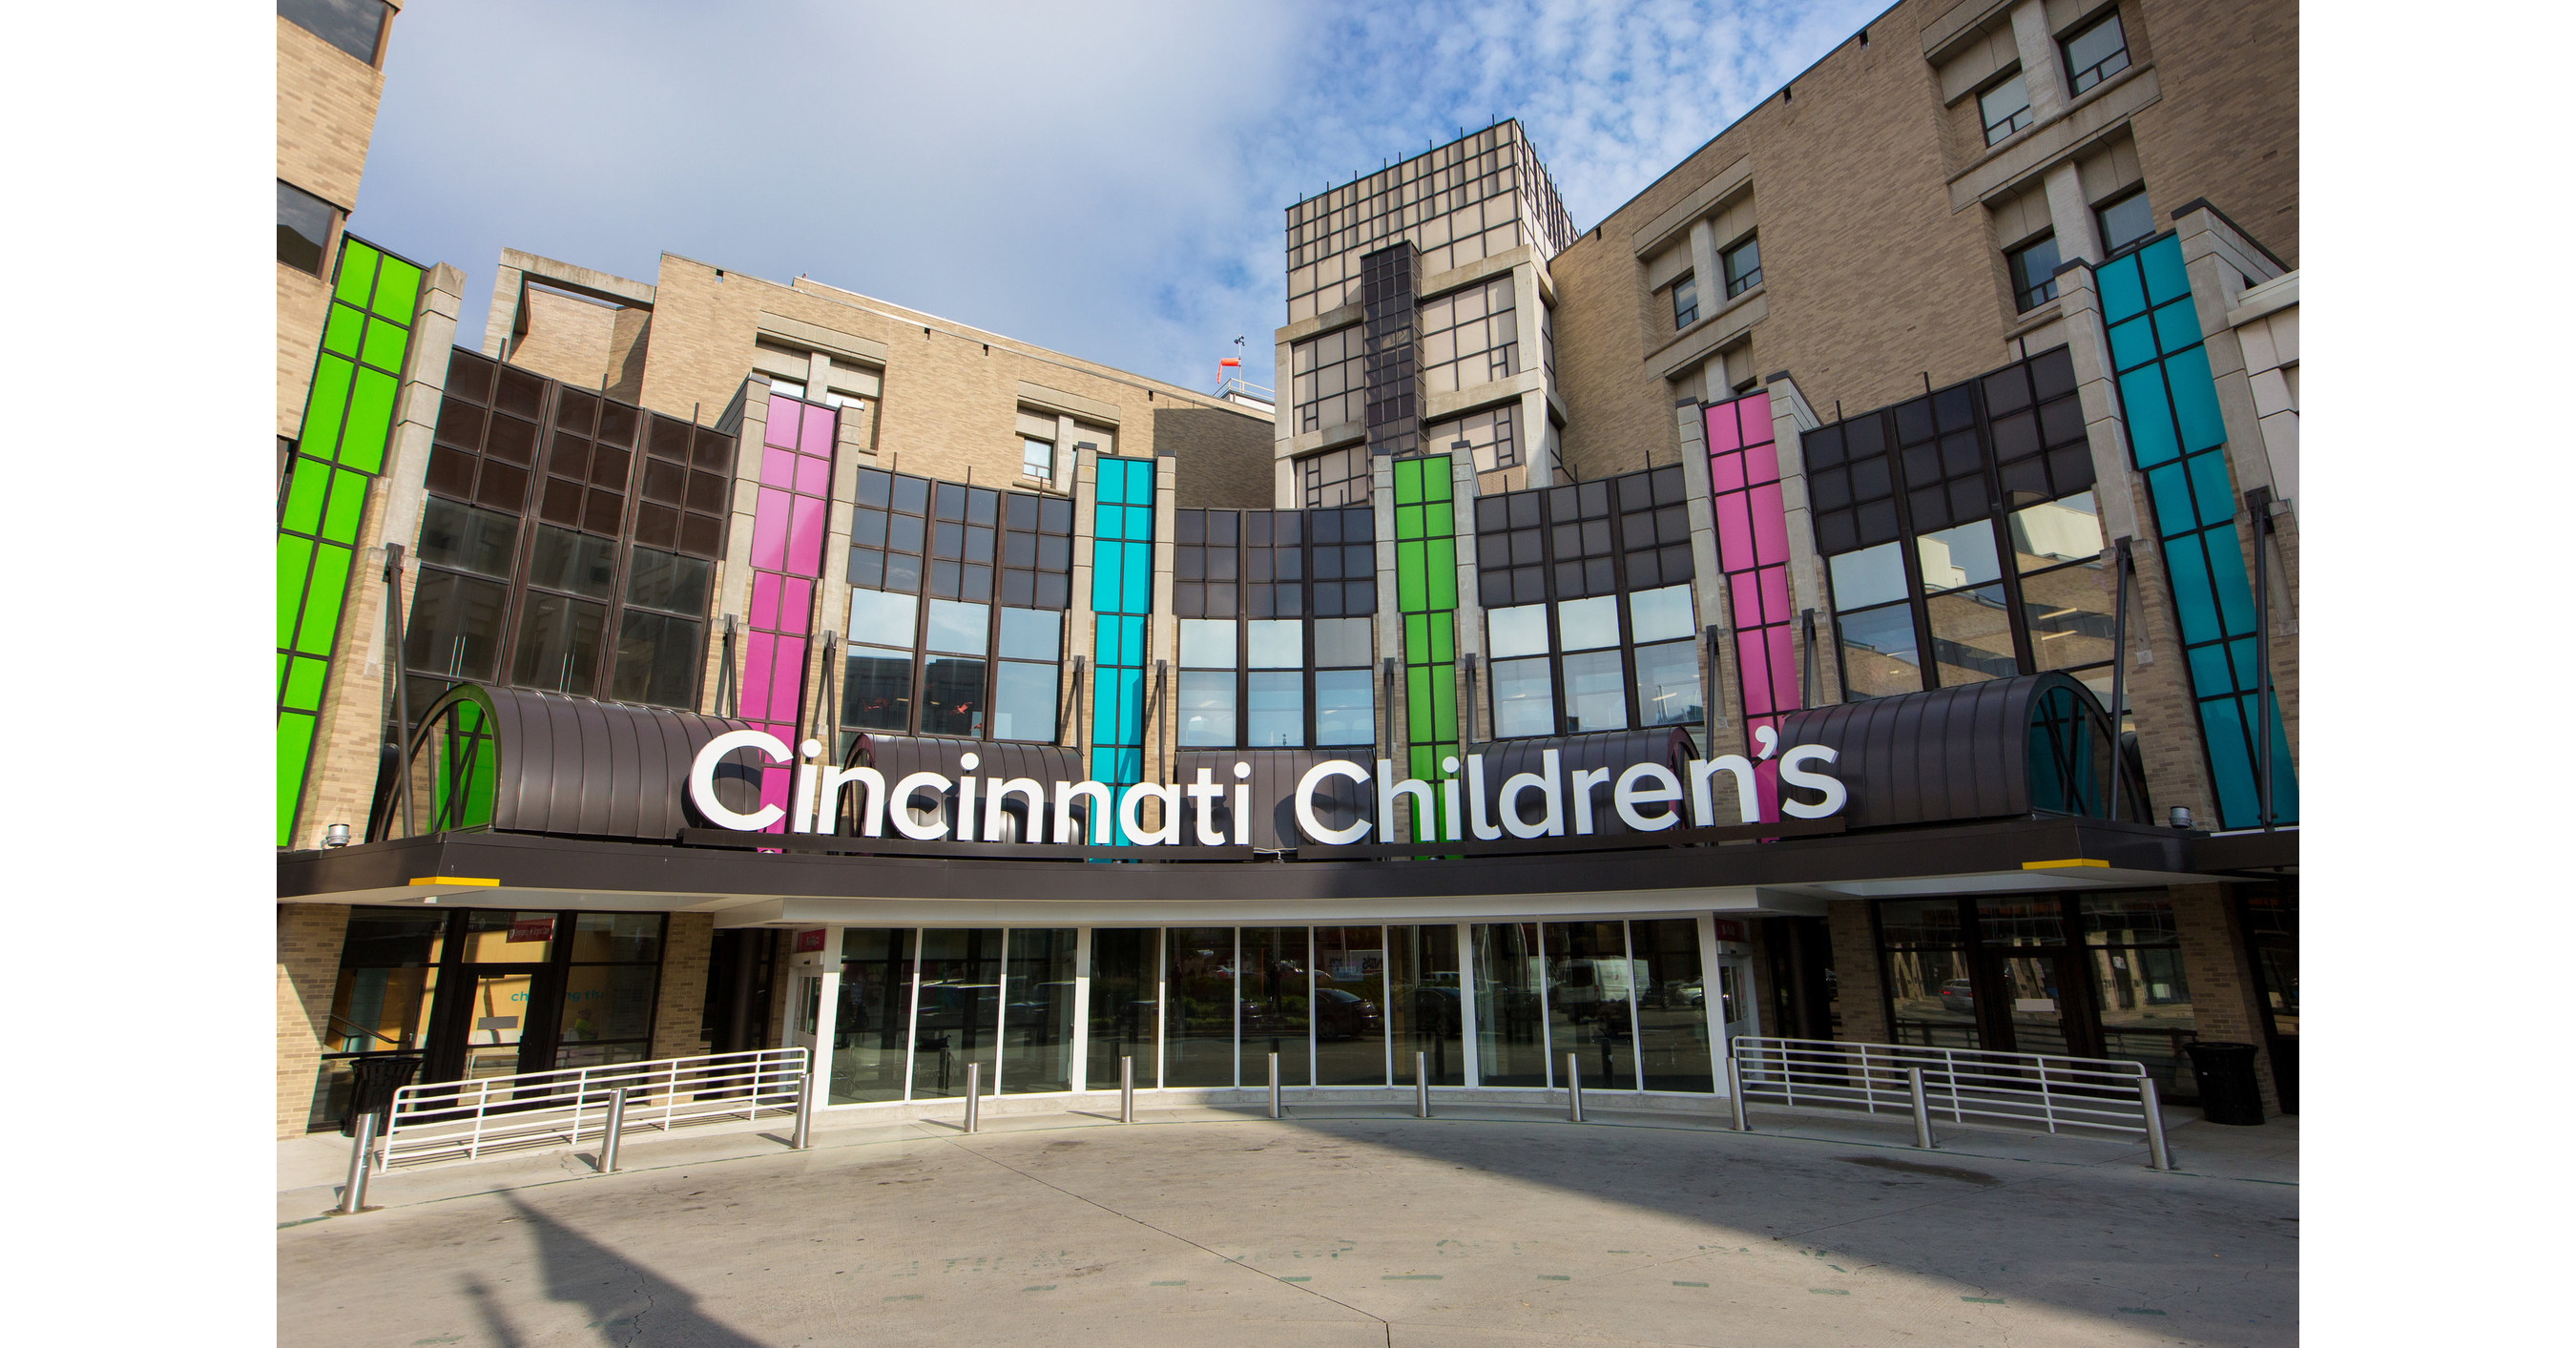 cincinnati-children-s-among-the-best-for-11th-year-in-a-row-in-u-s